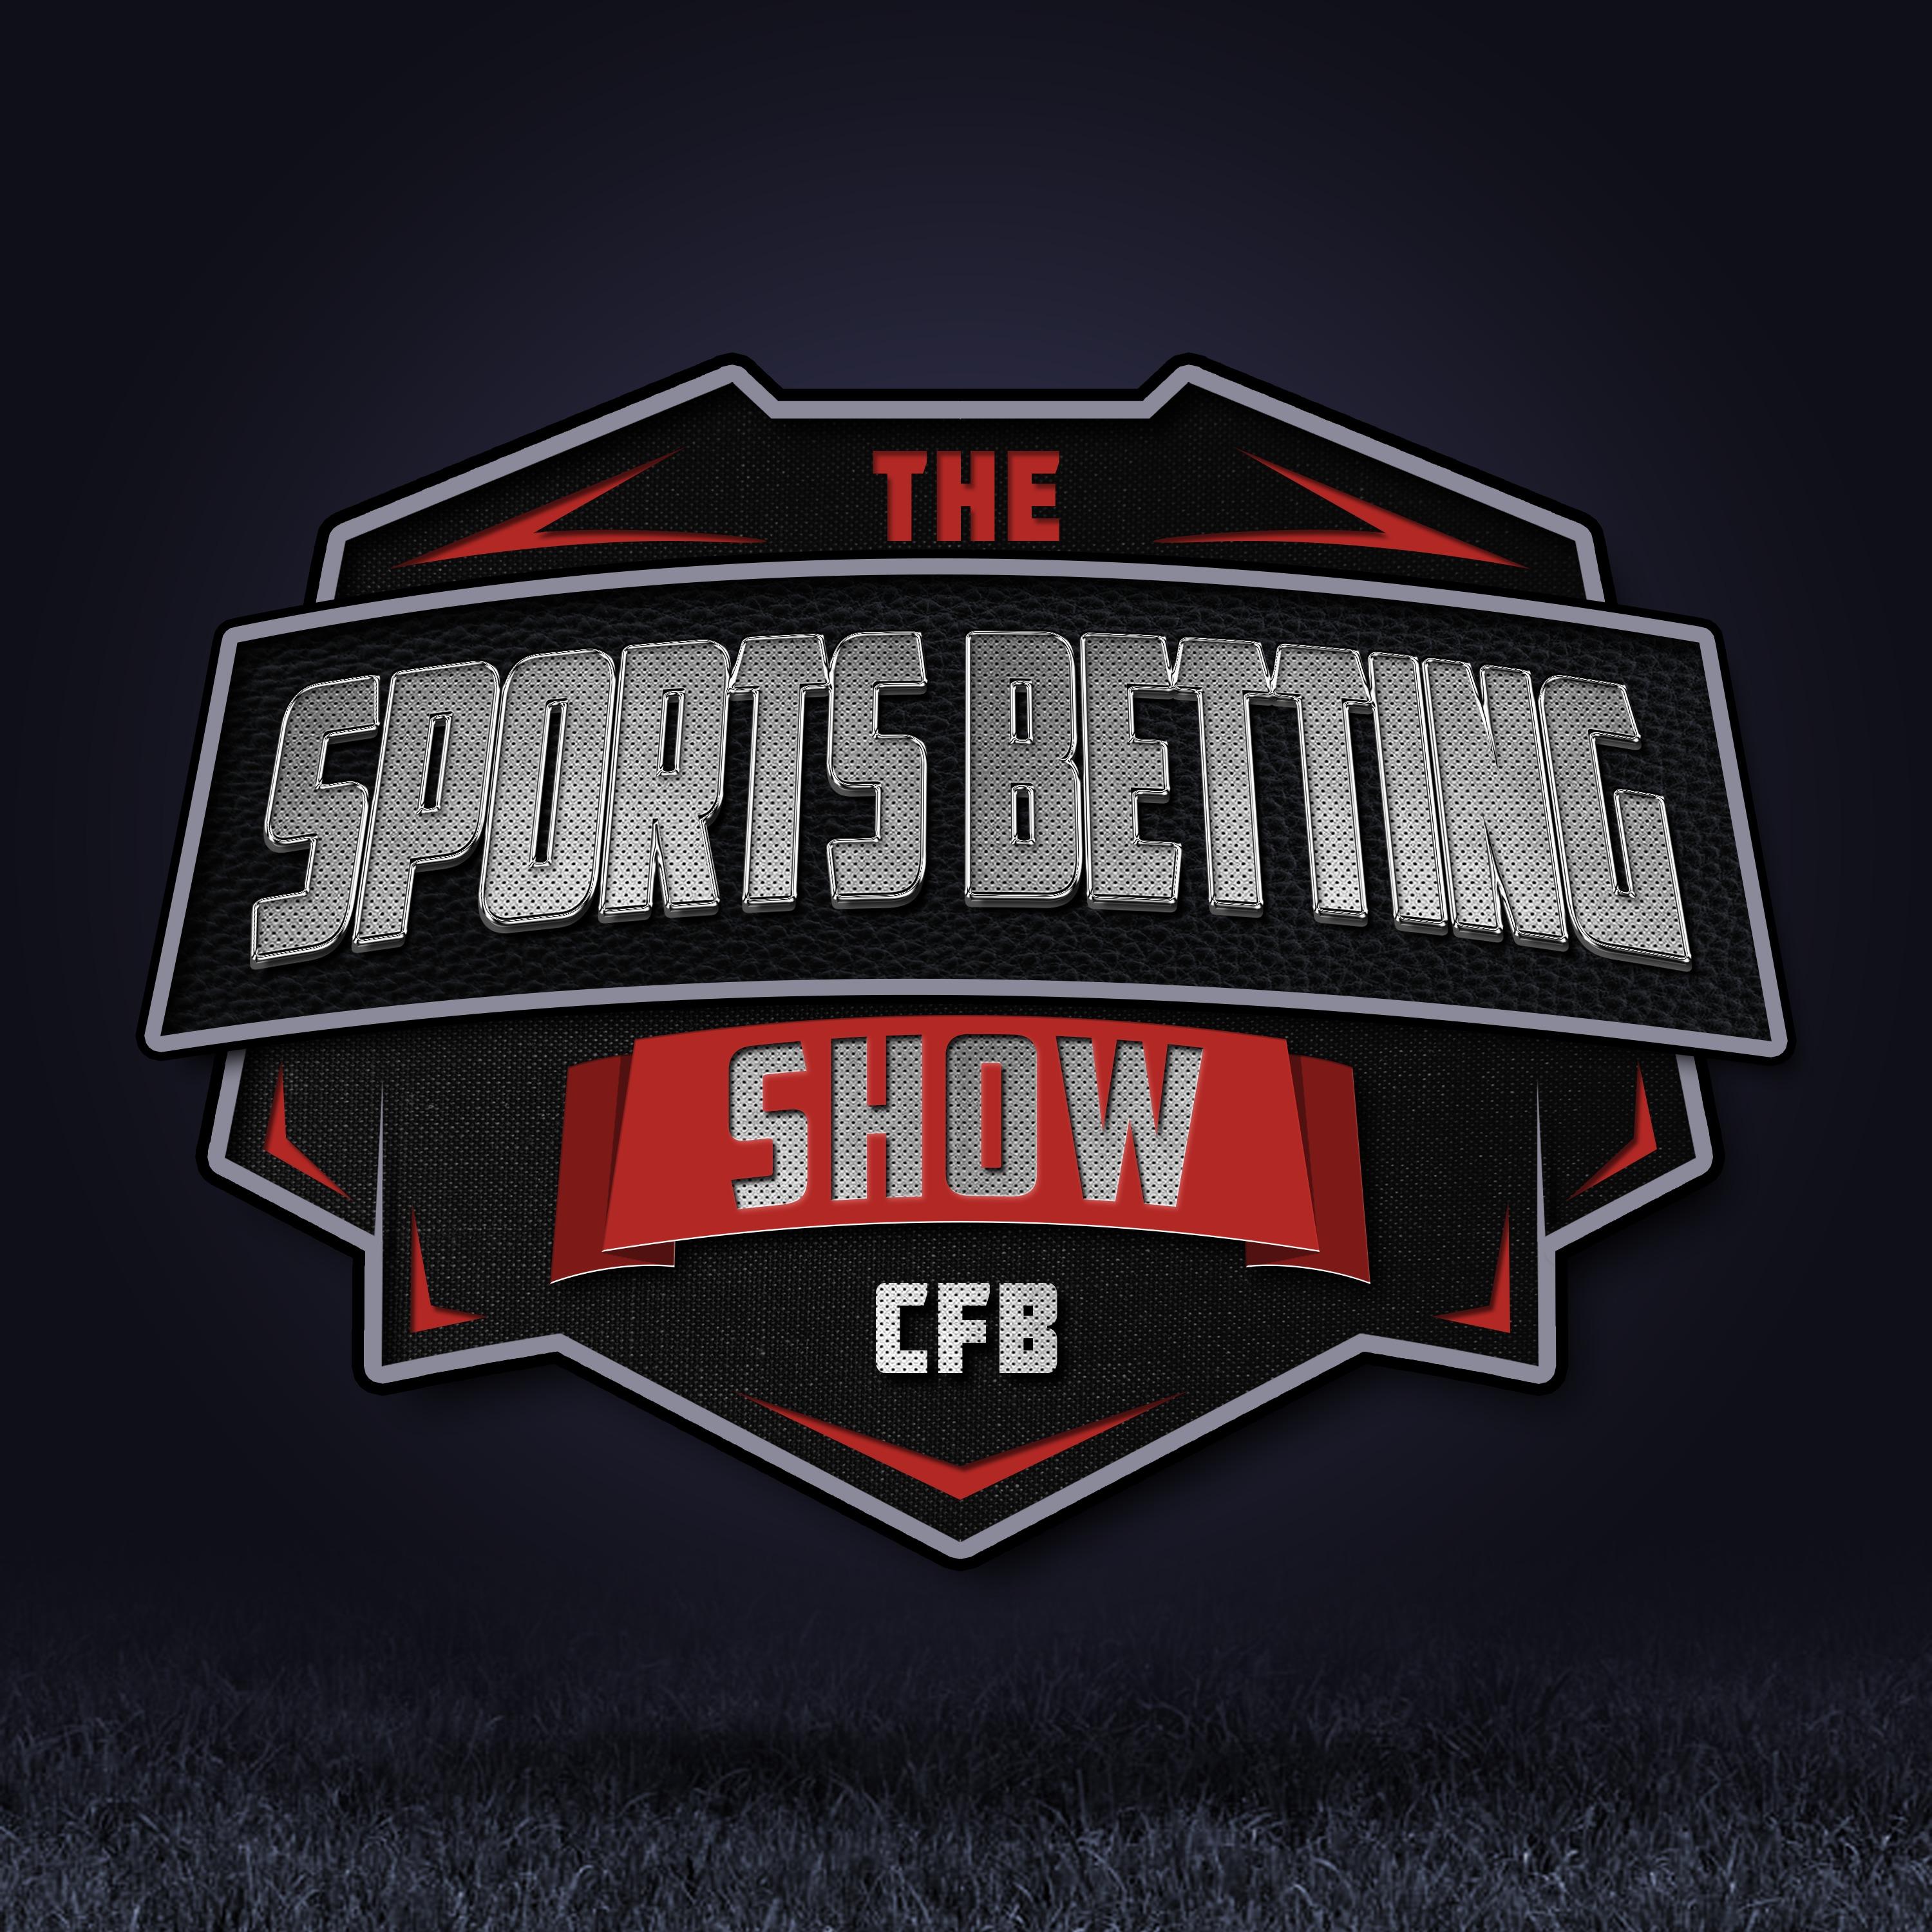 Show poster of The Sports Betting Show CFB